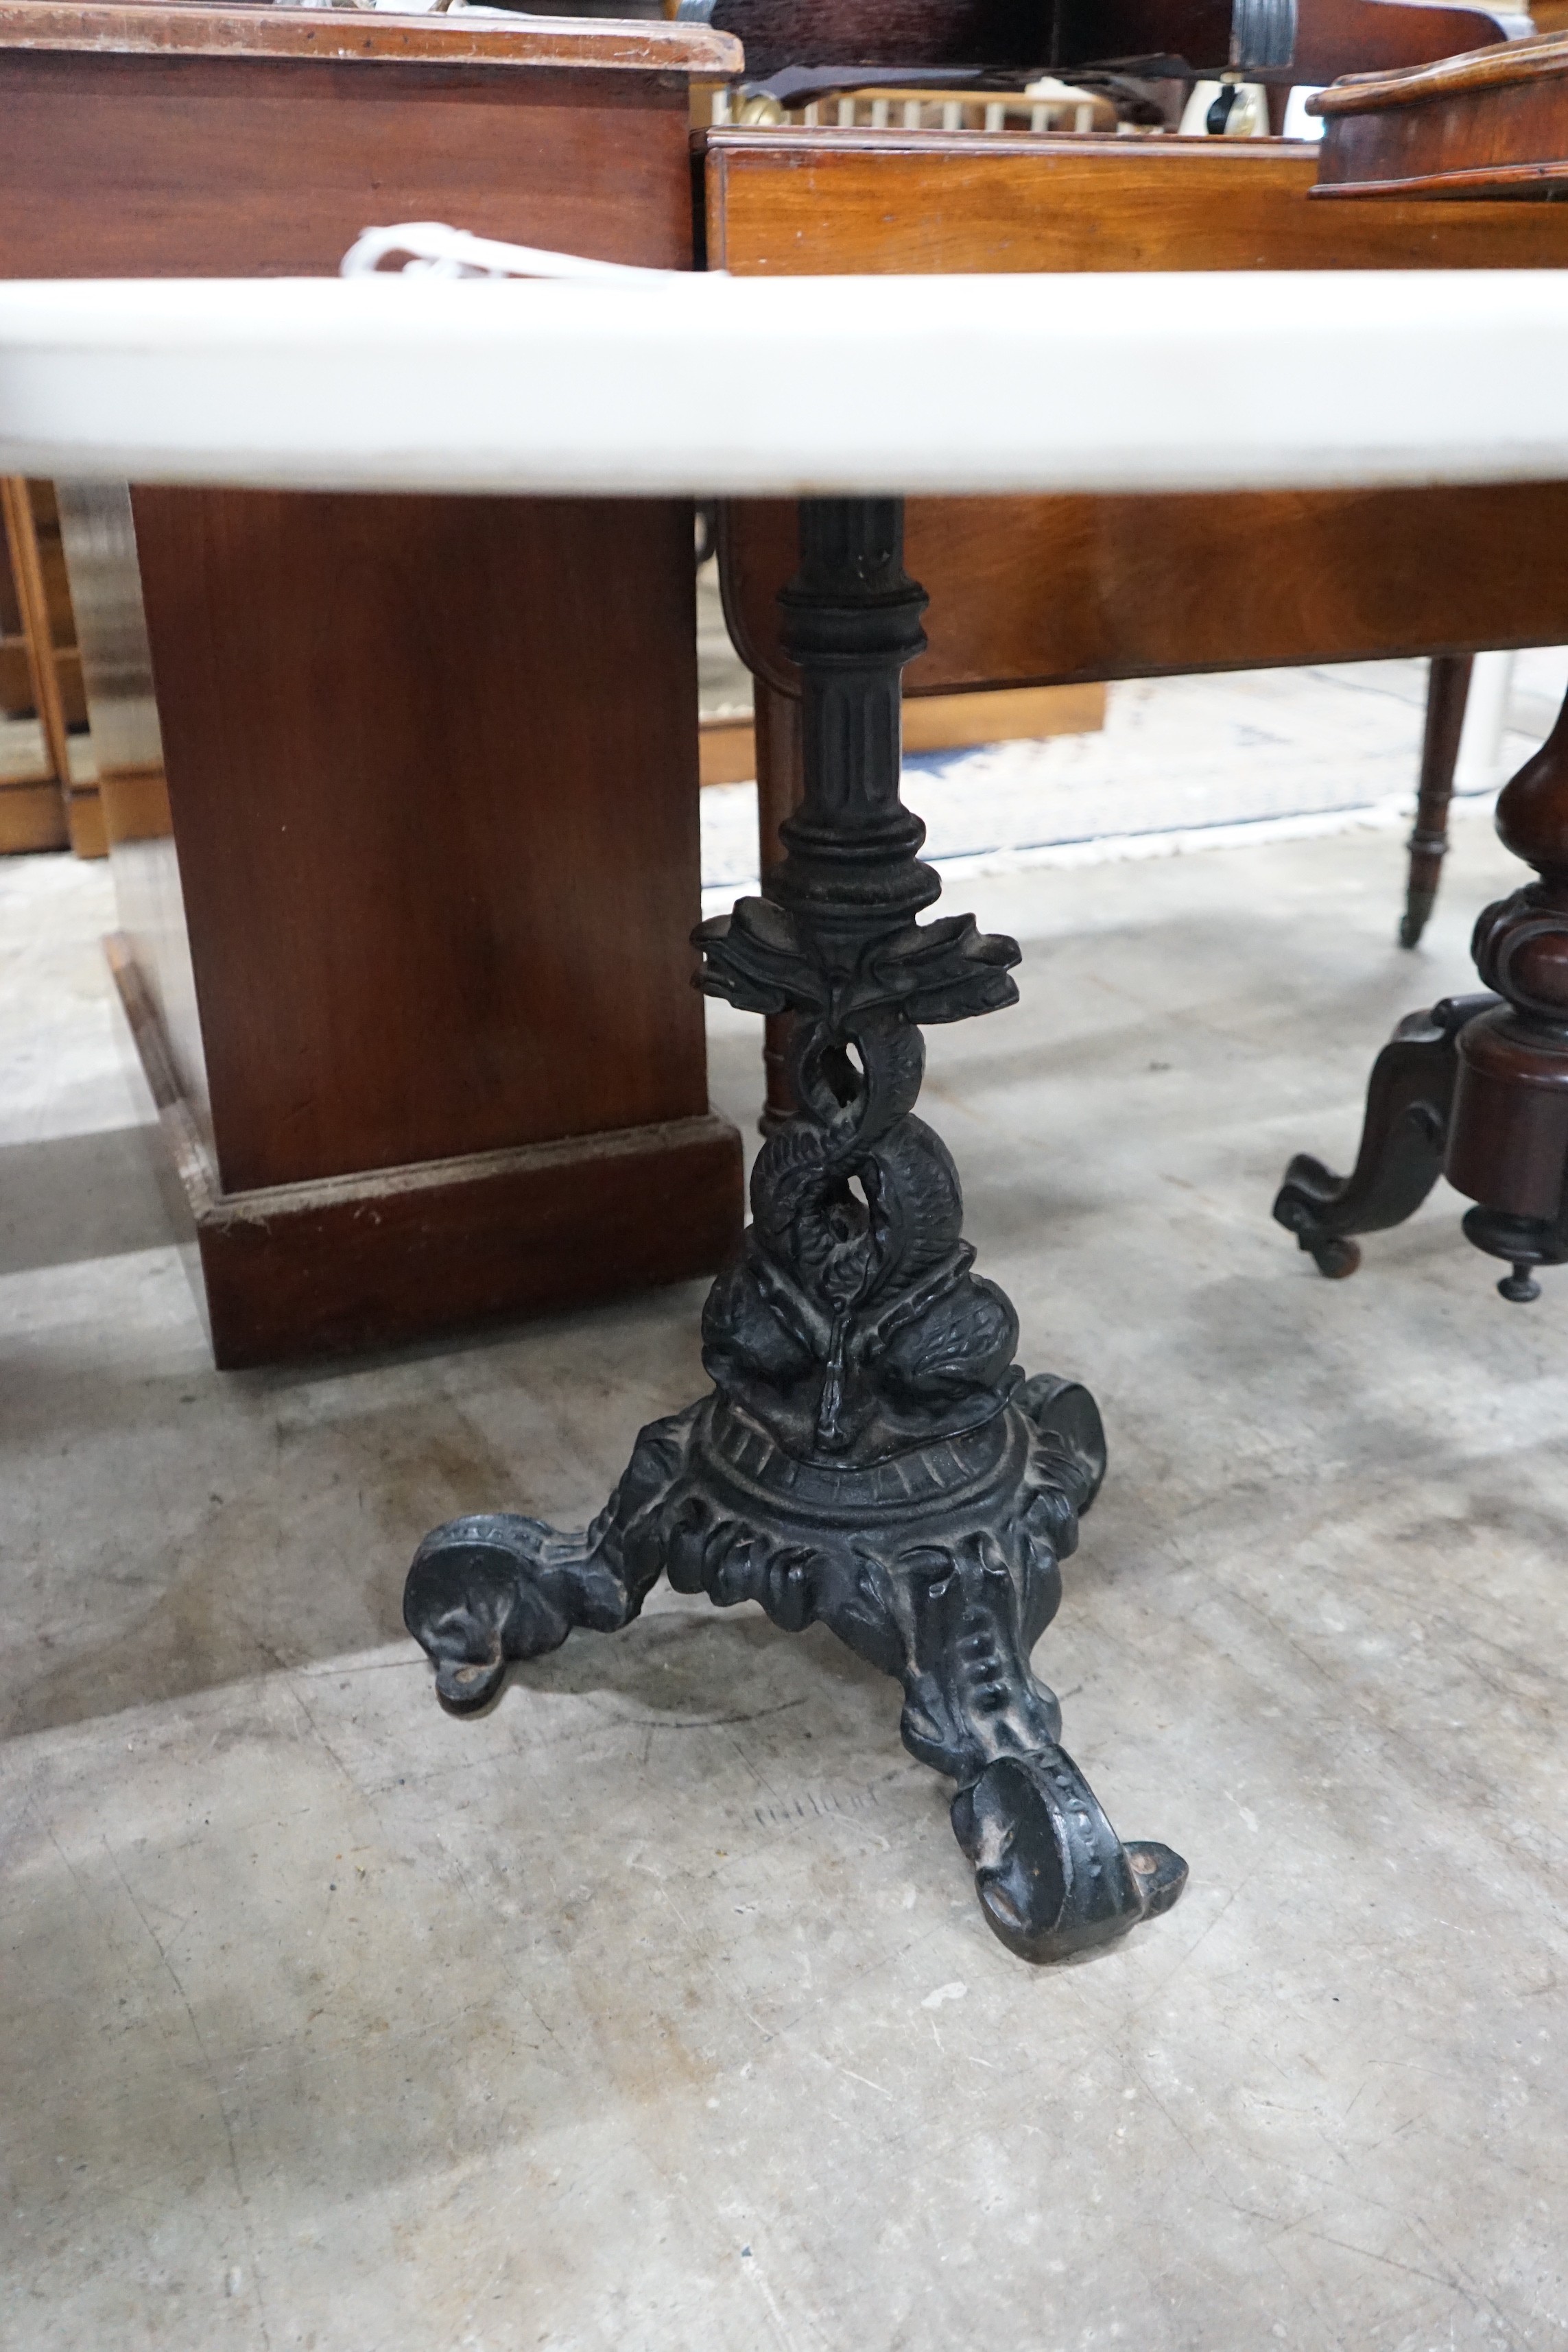 A Victorian style circular cast iron and reconstituted marble top occasional table, diameter 75cm, height 84cm